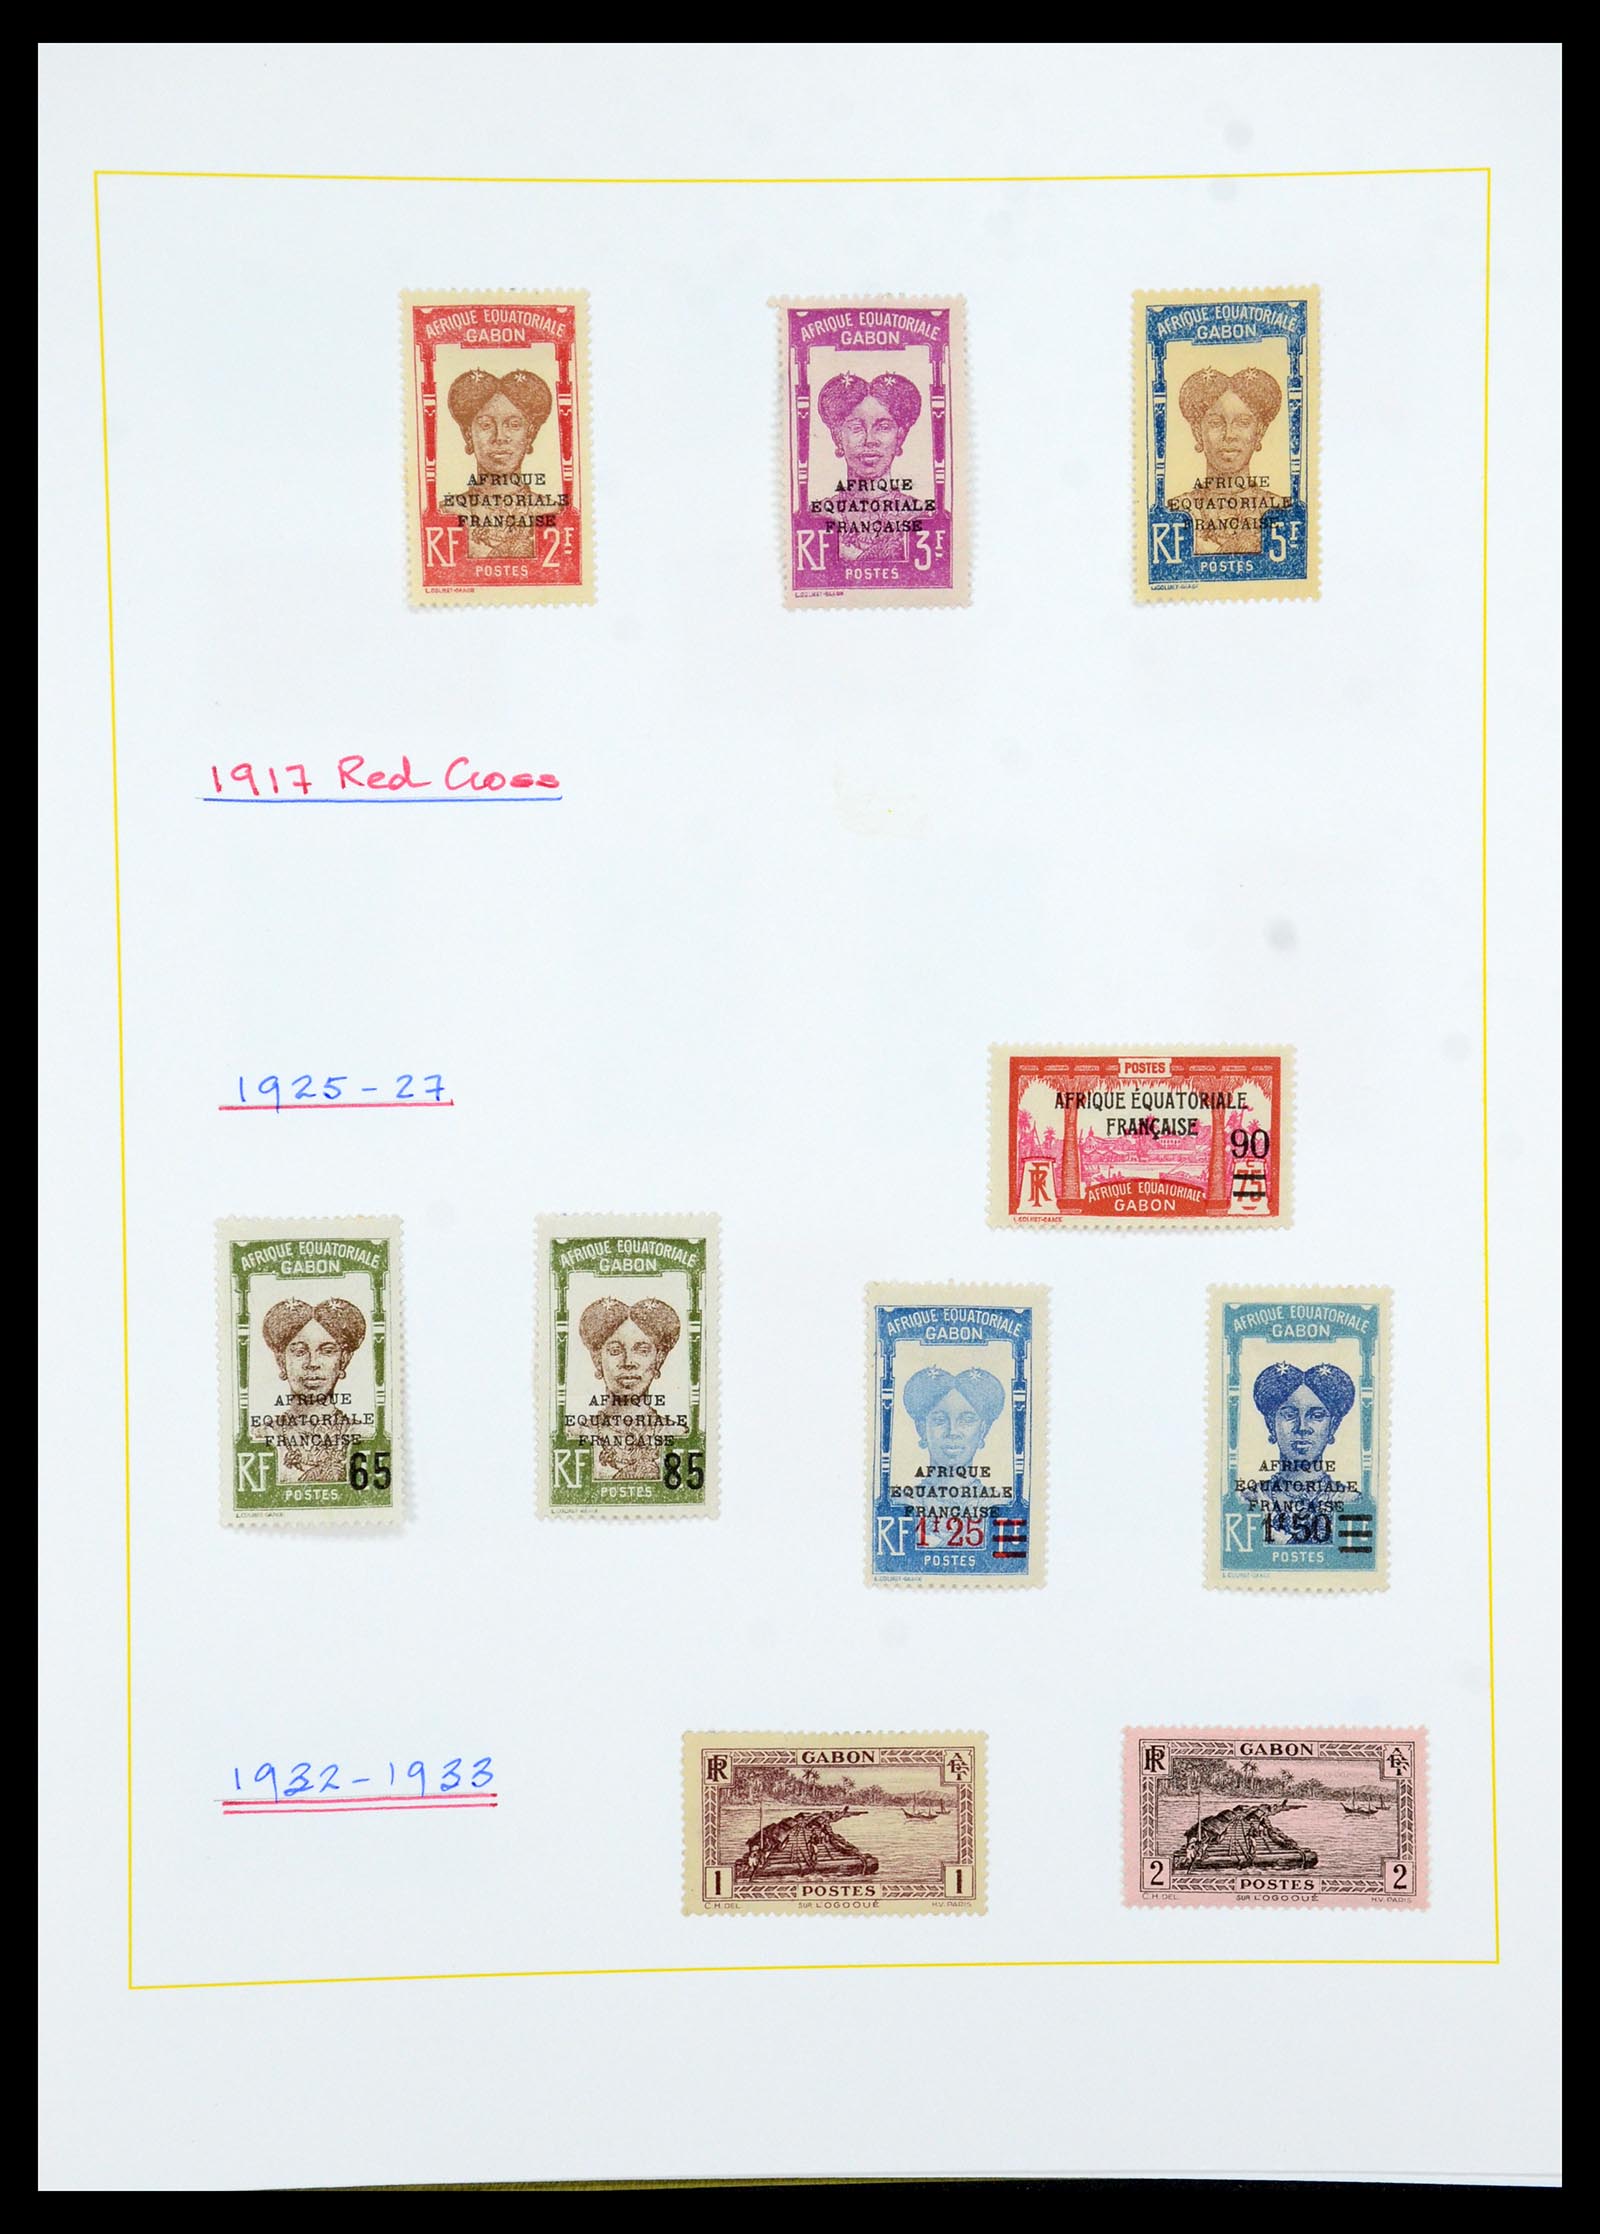 36099 097 - Stamp collection 36099 French coonies 1885-1950.